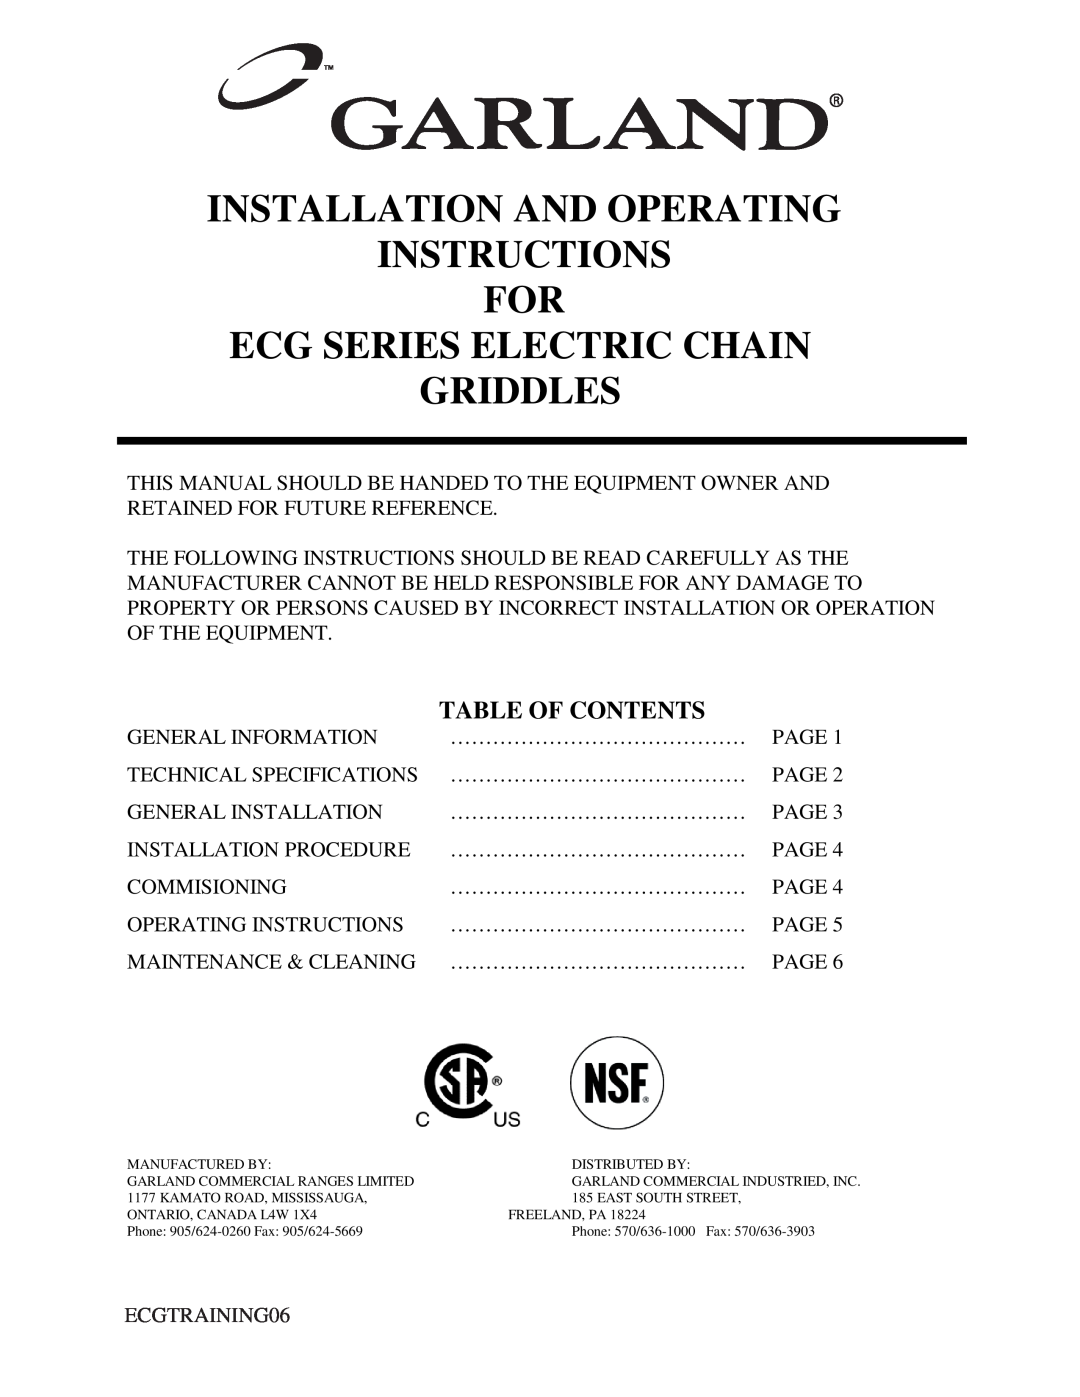 Garland ECG technical specifications Installation And Operating Instructions For, Ecg Series Electric Chain Griddles 